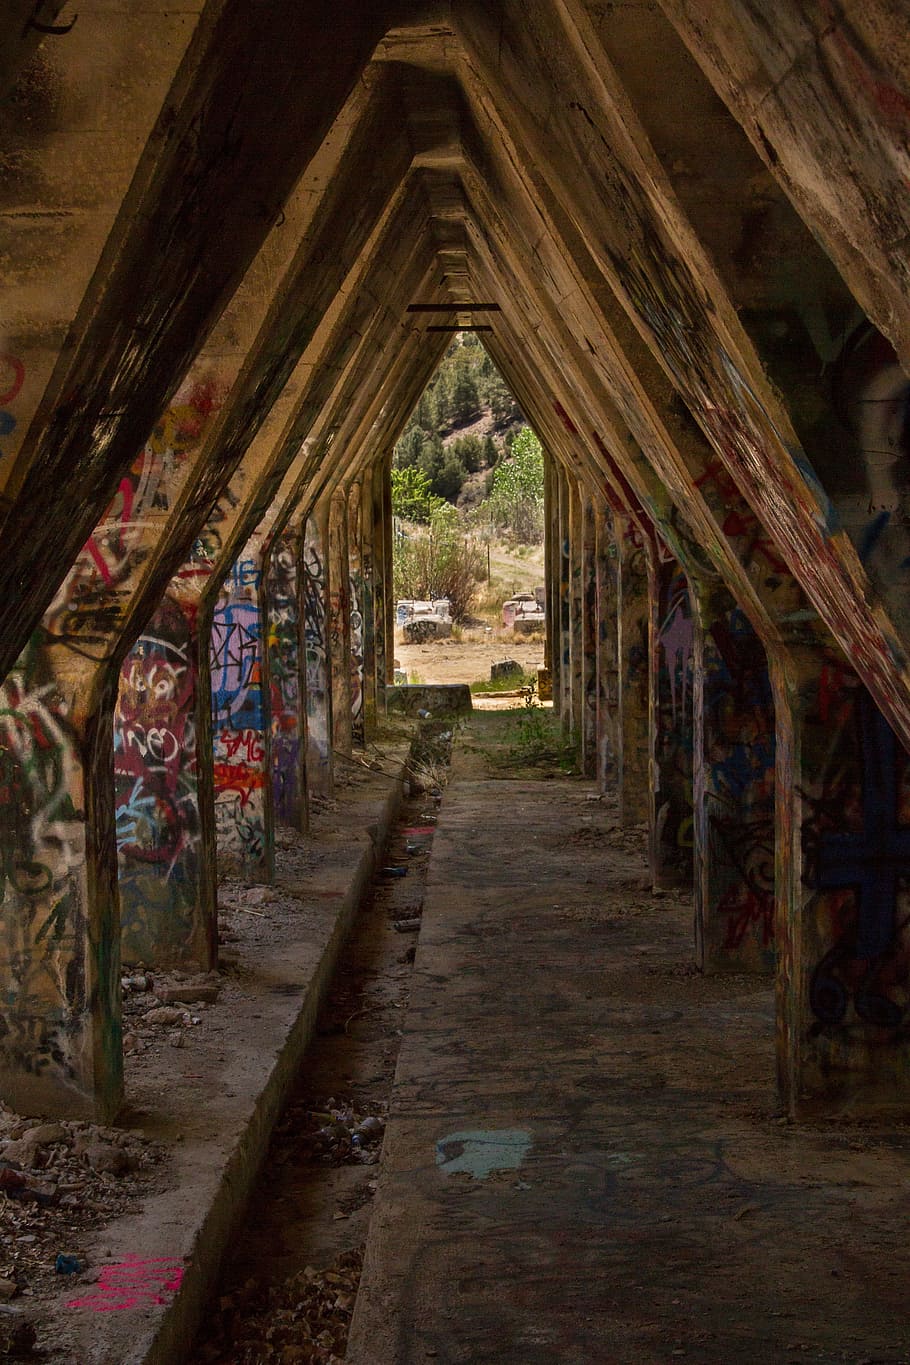 graffiti, ruin, old, abandoned, hallway, deserted, dilapidated, architecture, built structure, the way forward